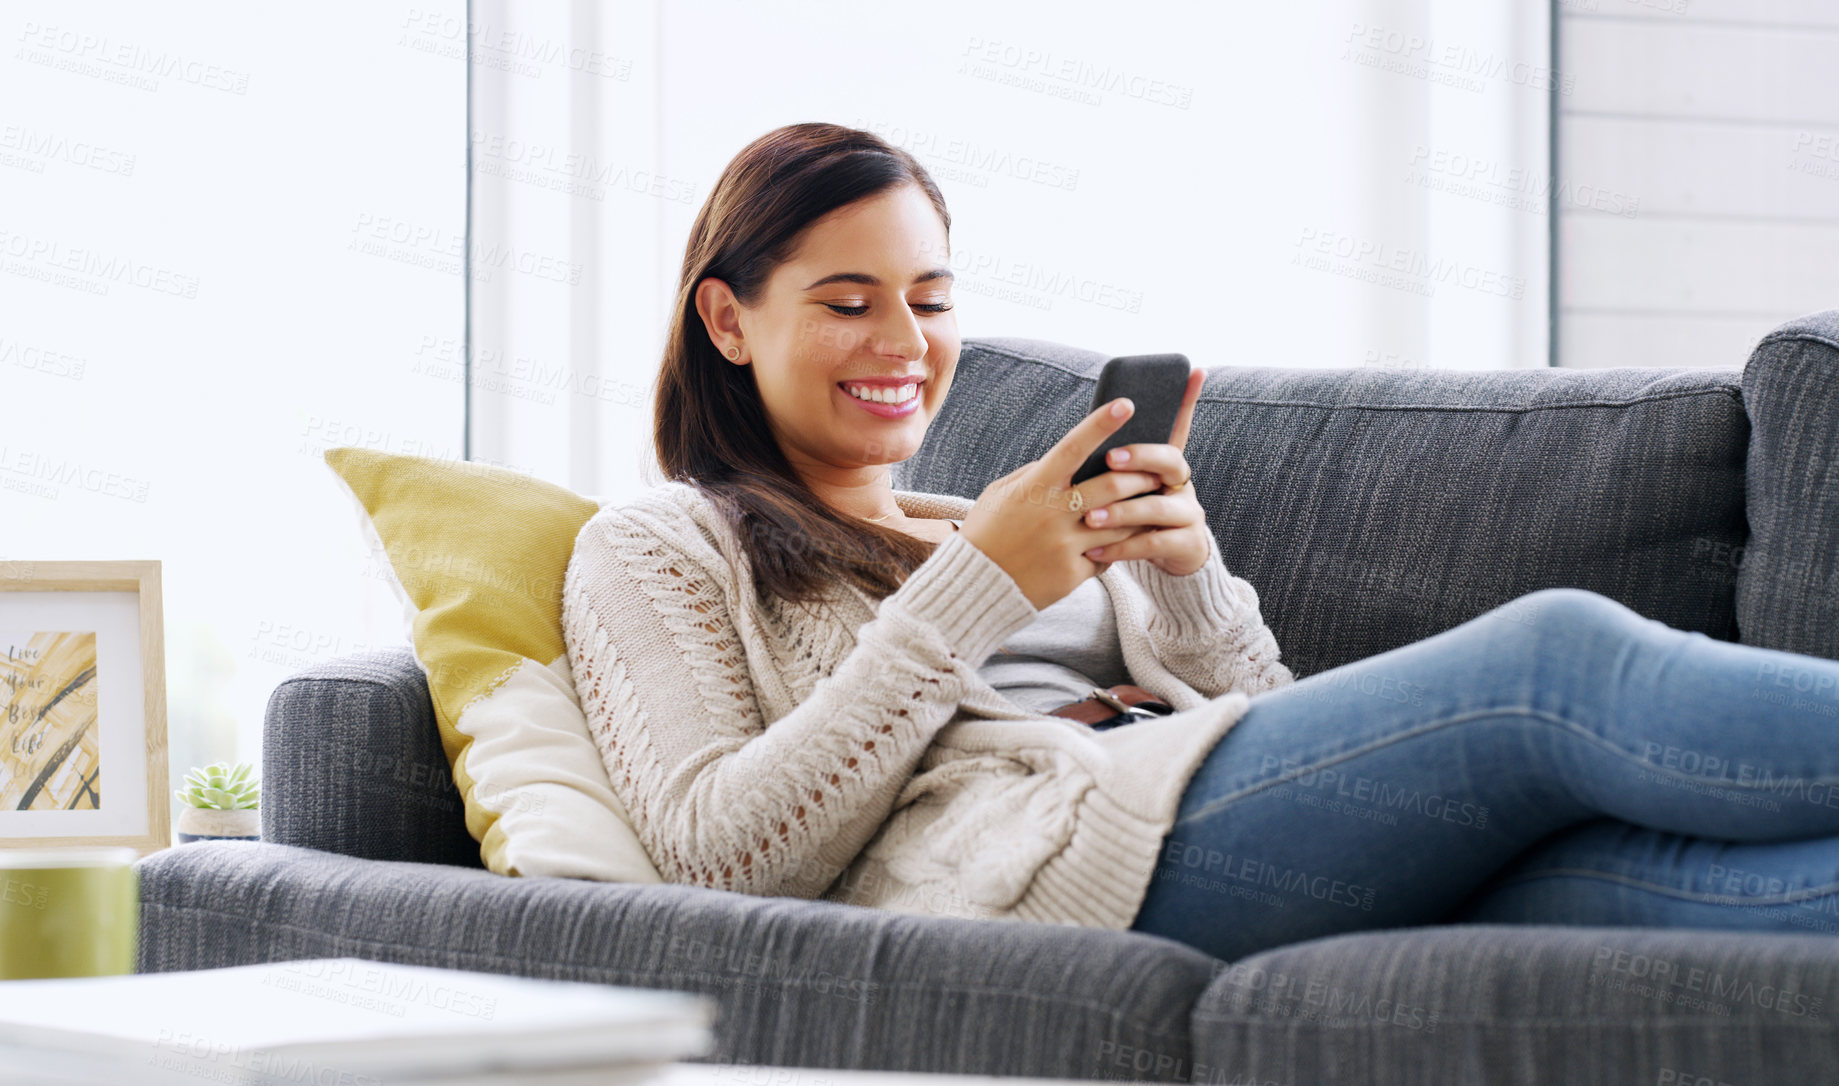 Buy stock photo Shot of an attractive young woman using her cellphone while relaxing on a couch at home